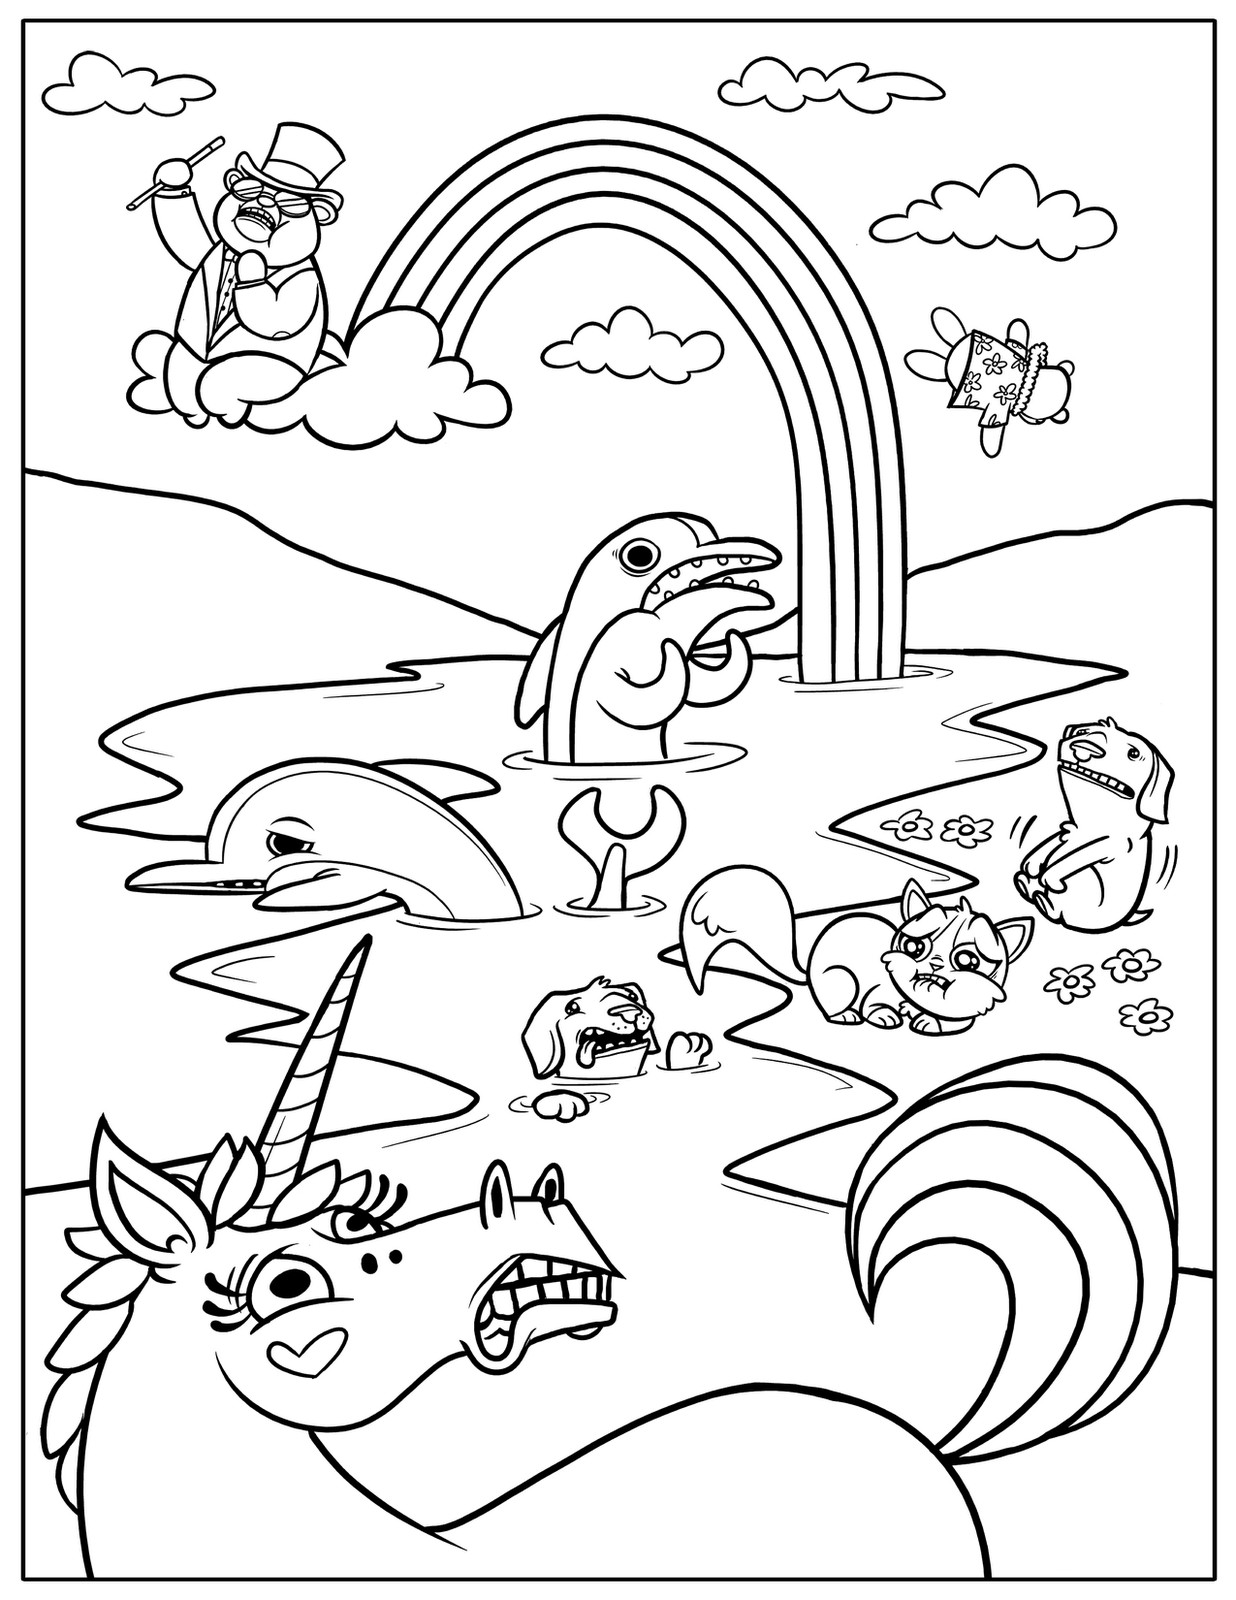 Printable Rainbow Coloring Pages
 Rainbow Coloring Page